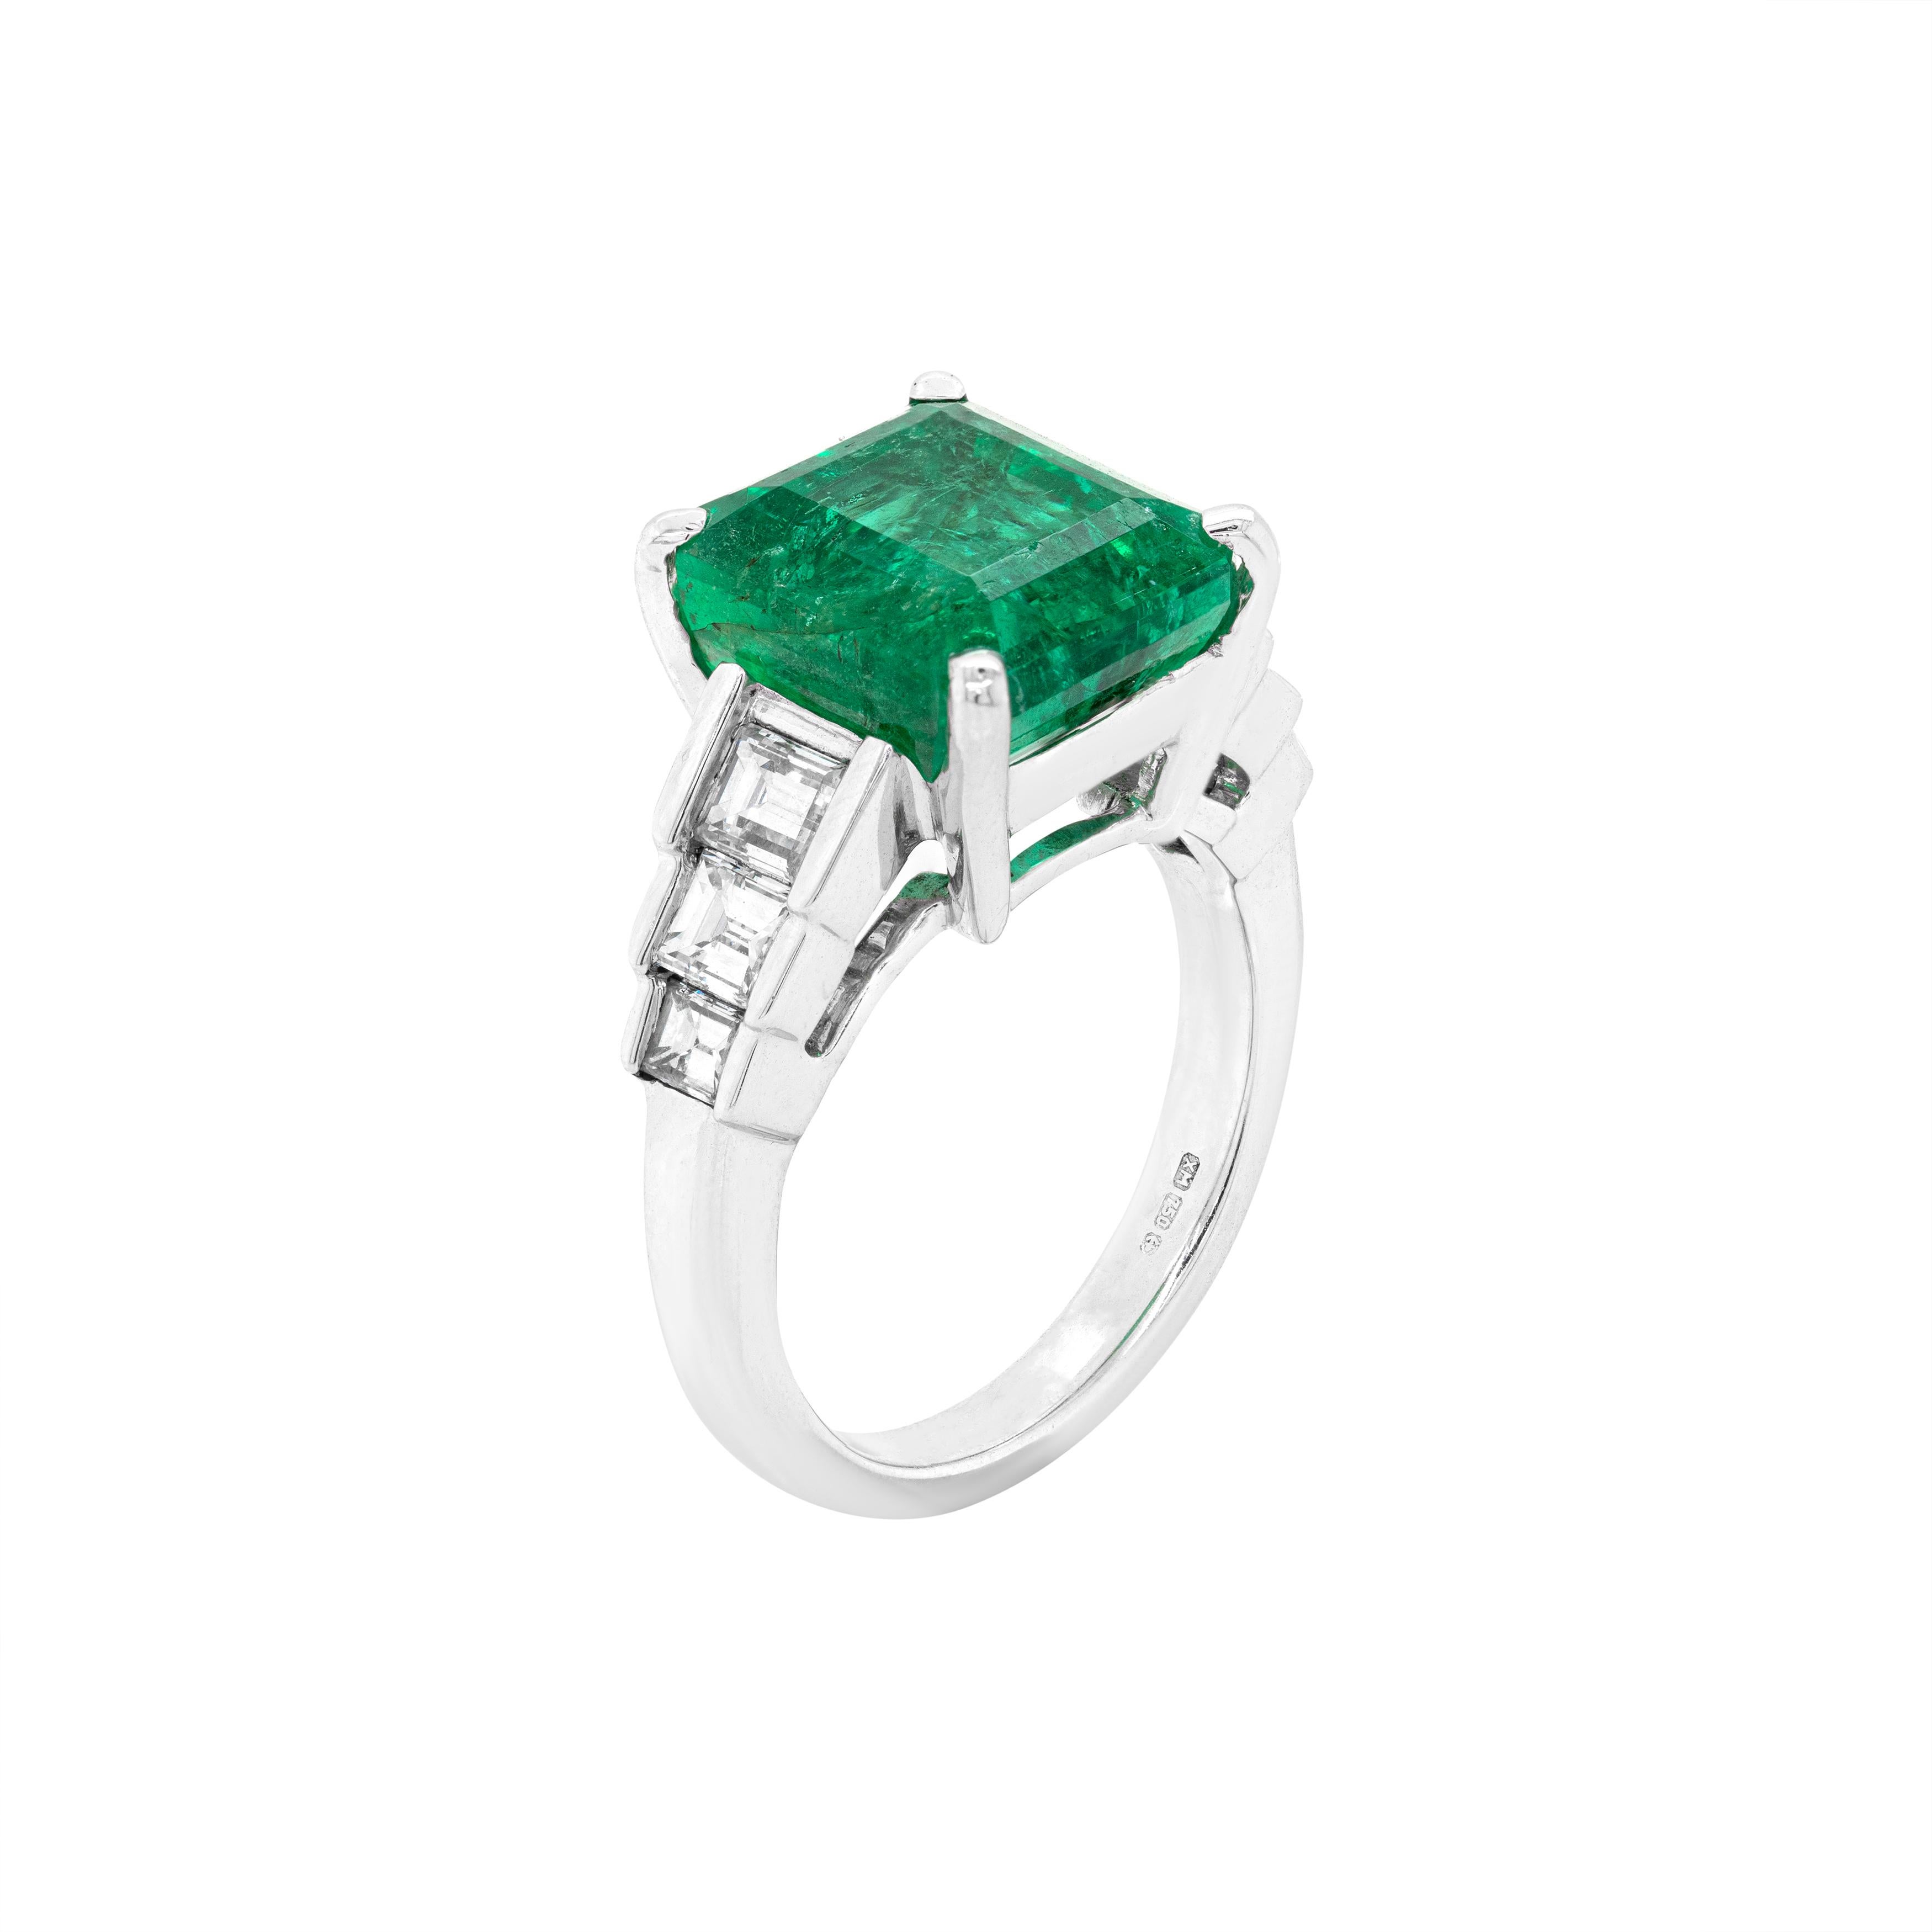 This amazing 18 carat white gold engagement ring features a beautiful 7.24ct emerald cut natural emerald, mounted in a four claw, open back setting. The emerald is accompanied by three baguette cut diamonds on either side, mounted in open back,